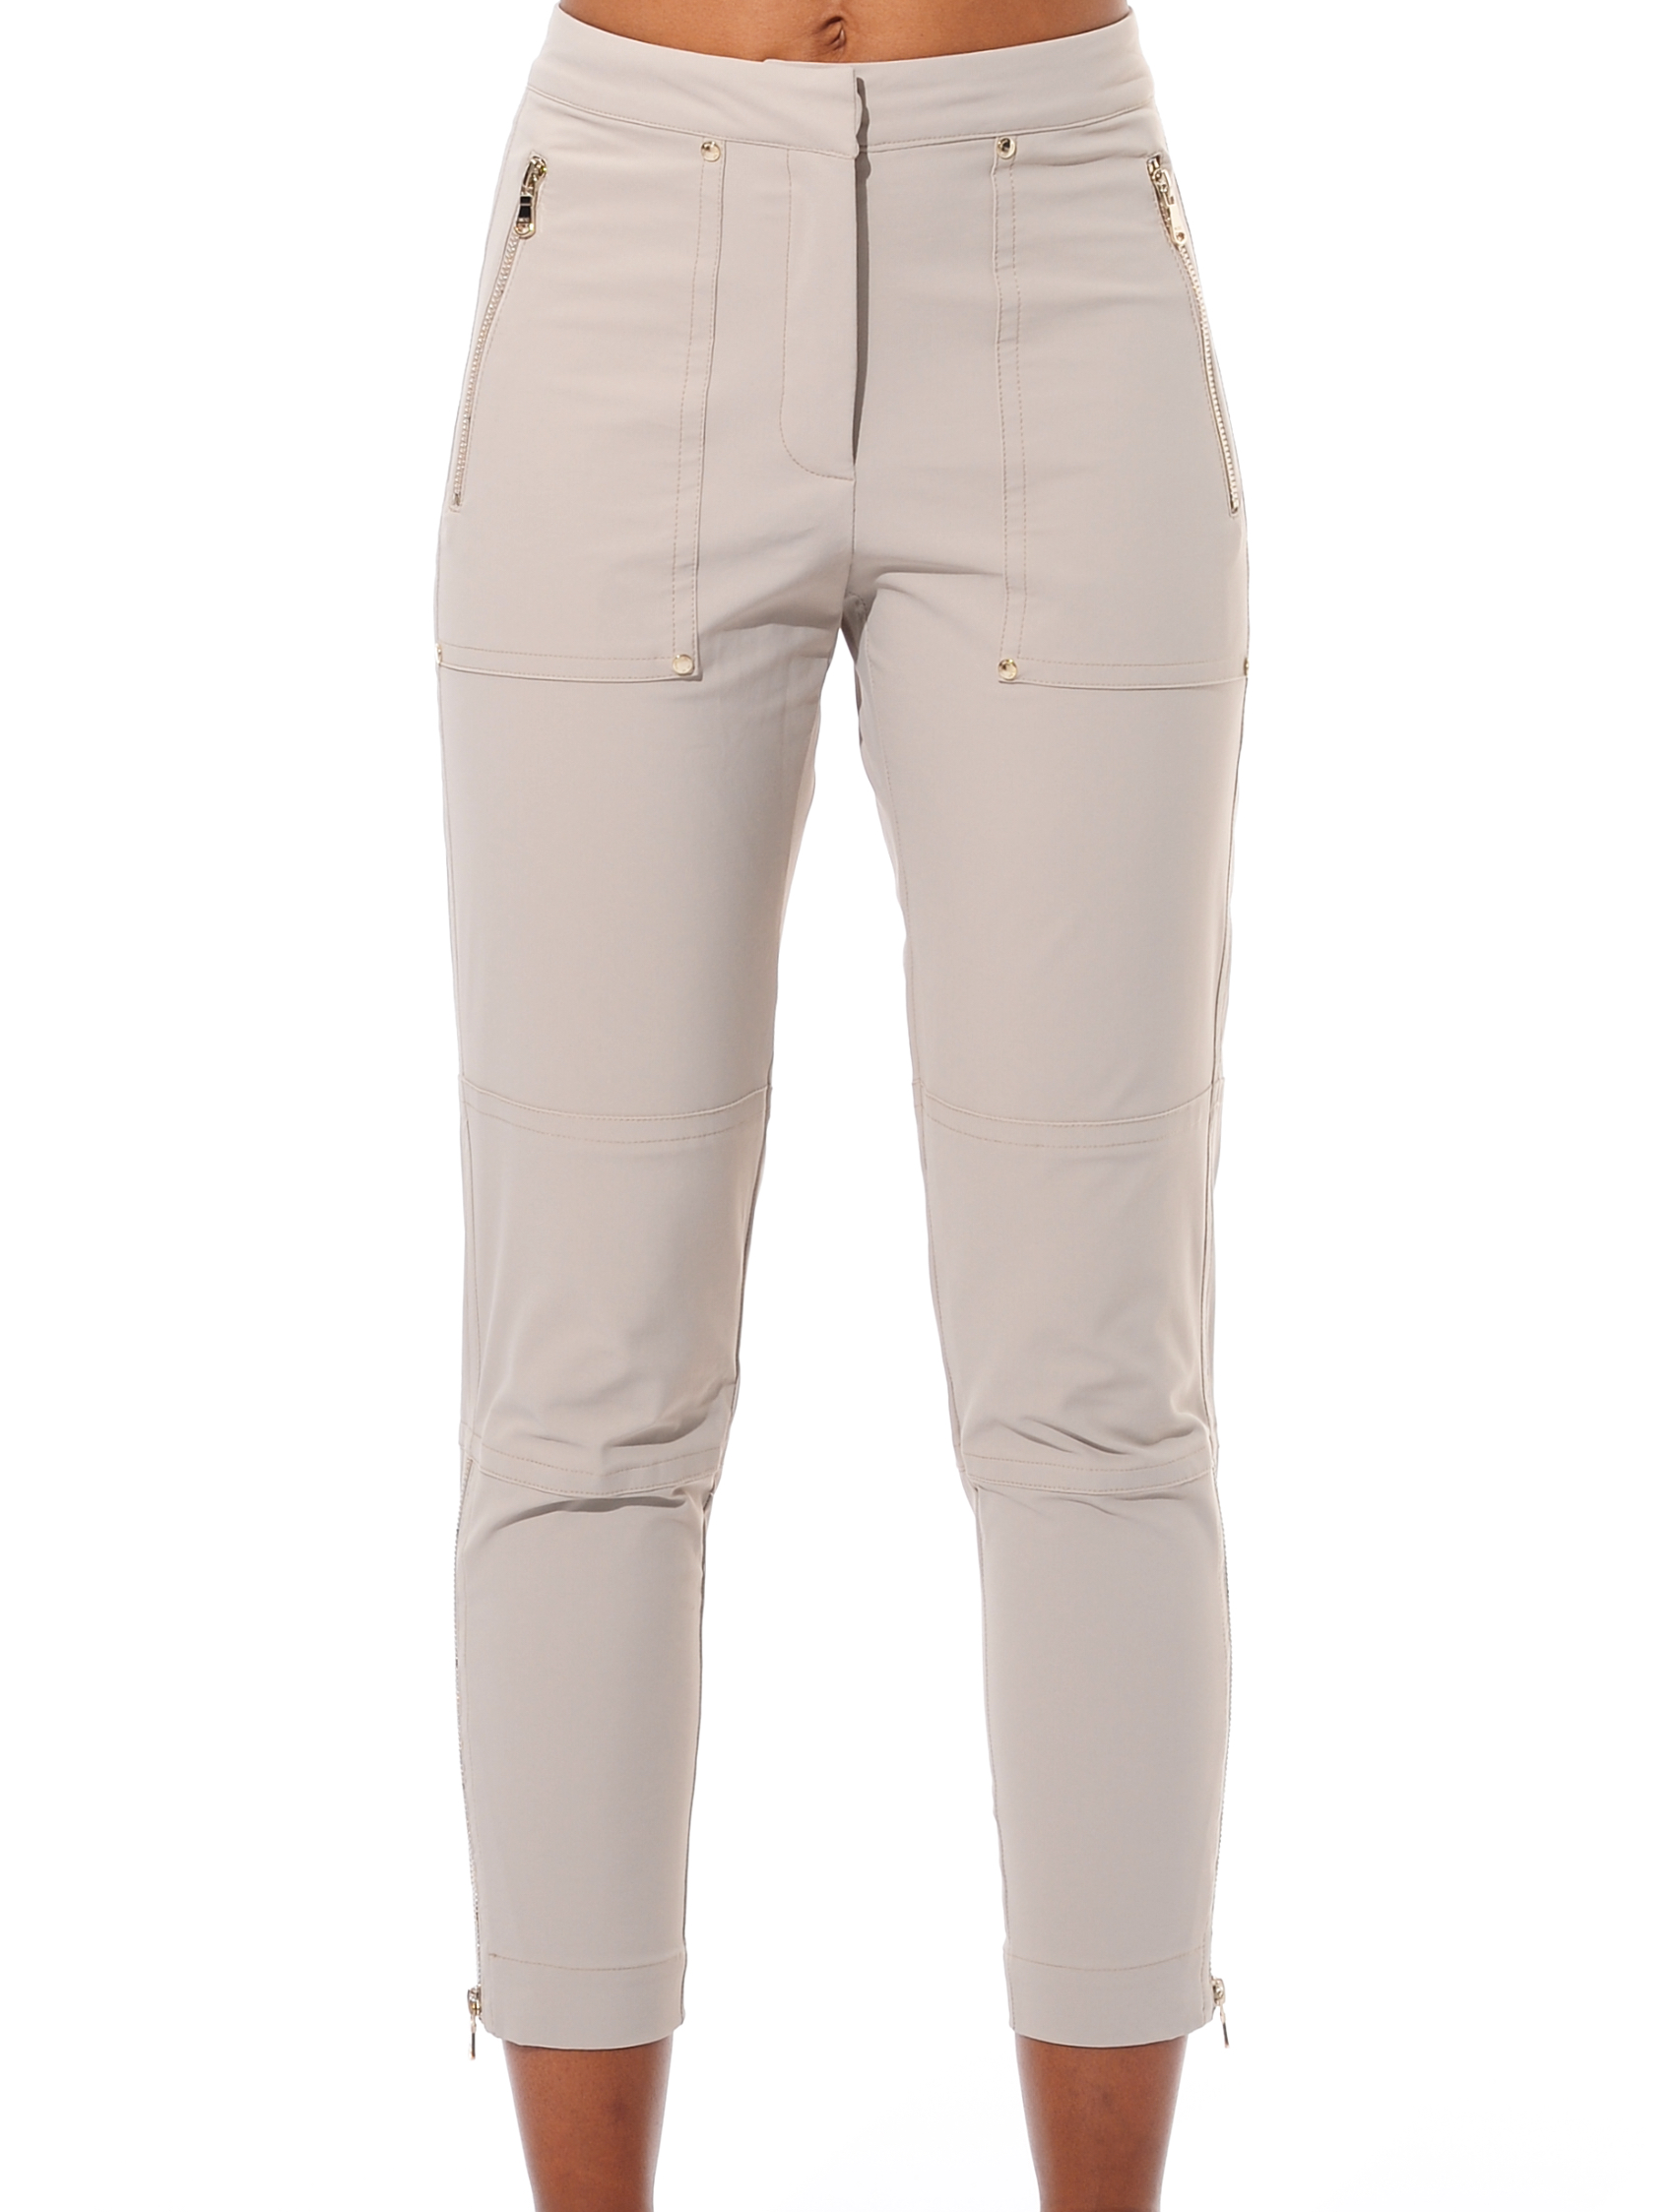 4way stretch tapered fit cargo pants light taupe 